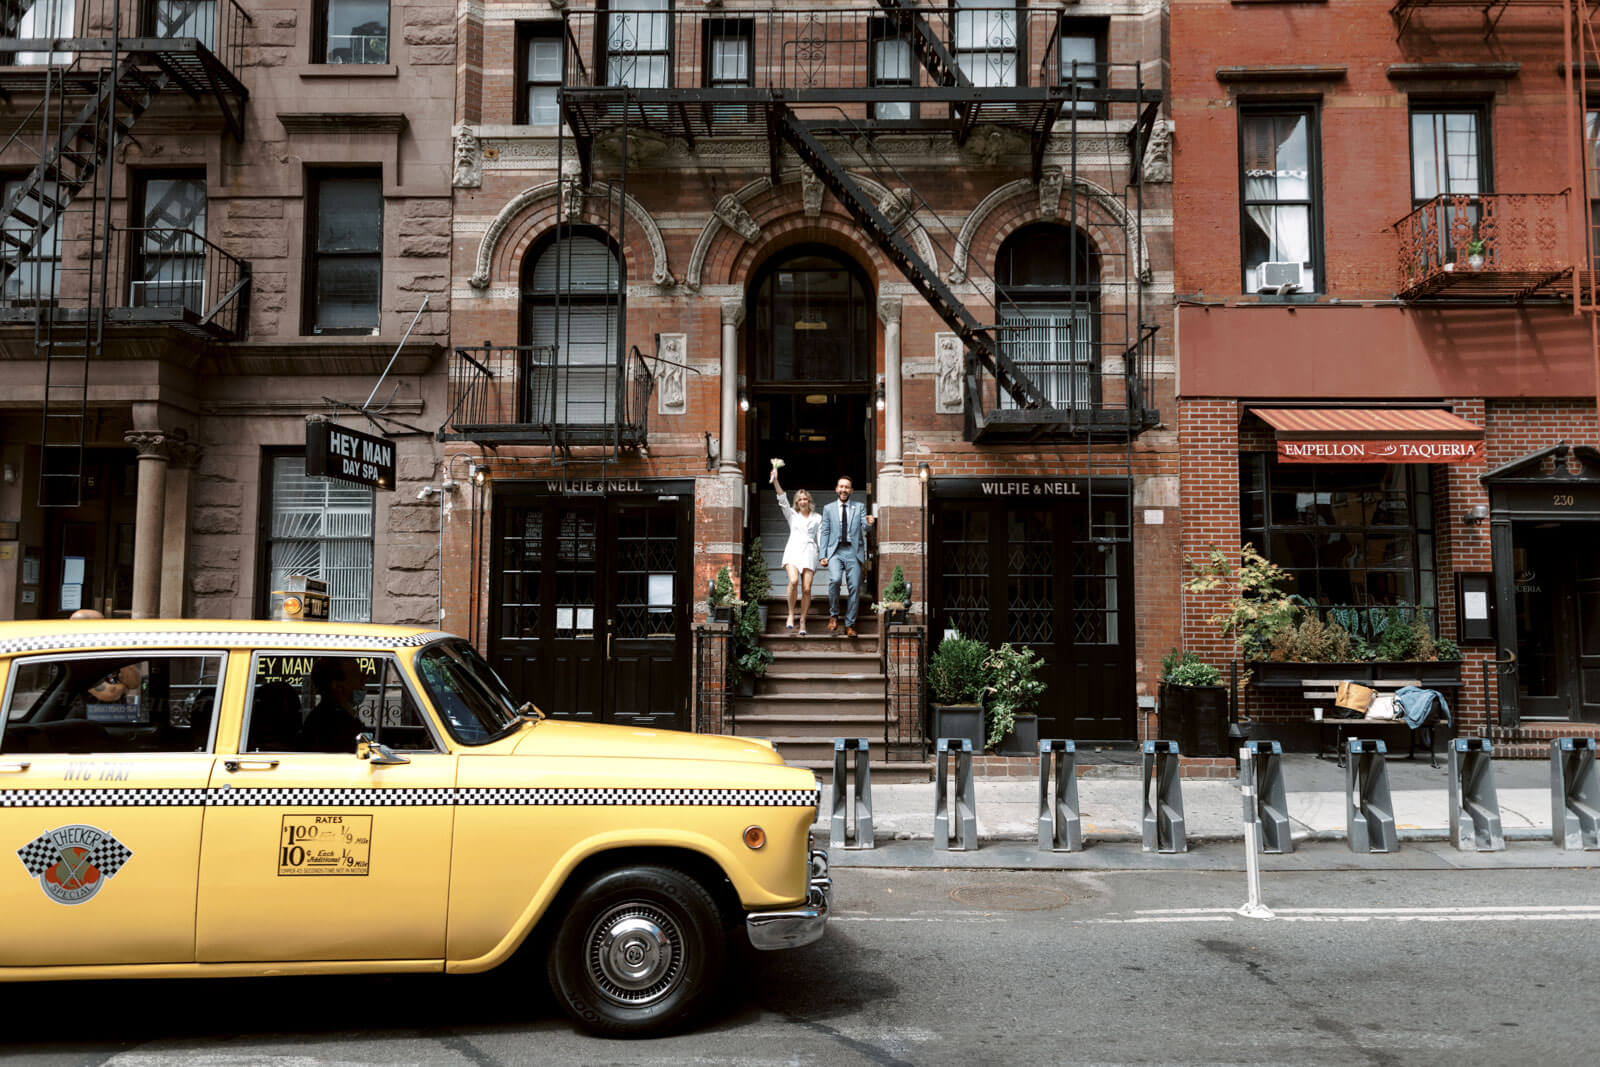 The bride and the groom are standing on the front staircase of Wilfie & Nell Pub NYC. In front is an NYC yellow cab.